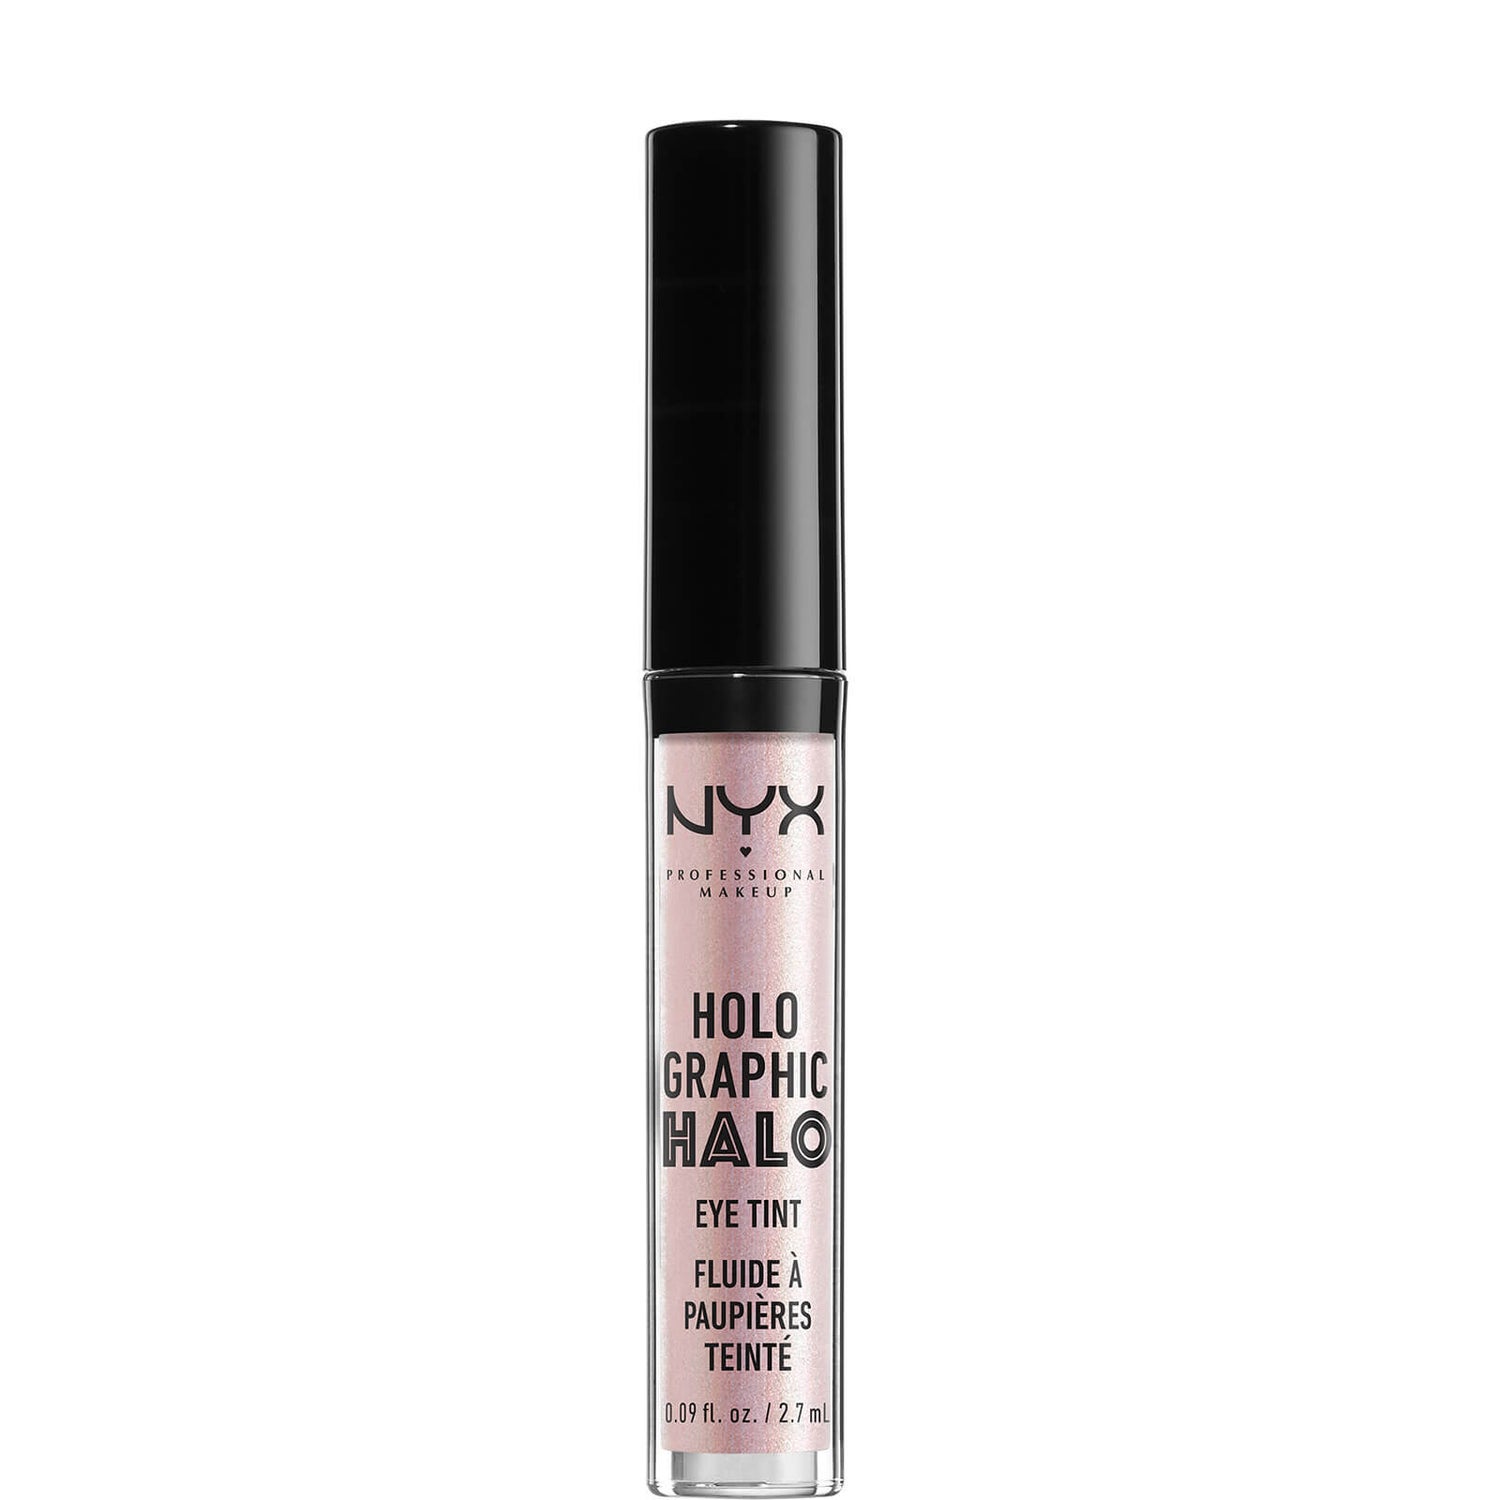 NYX Professional Makeup Cult Beauty Exclusive Holographic Halo Eye Tint